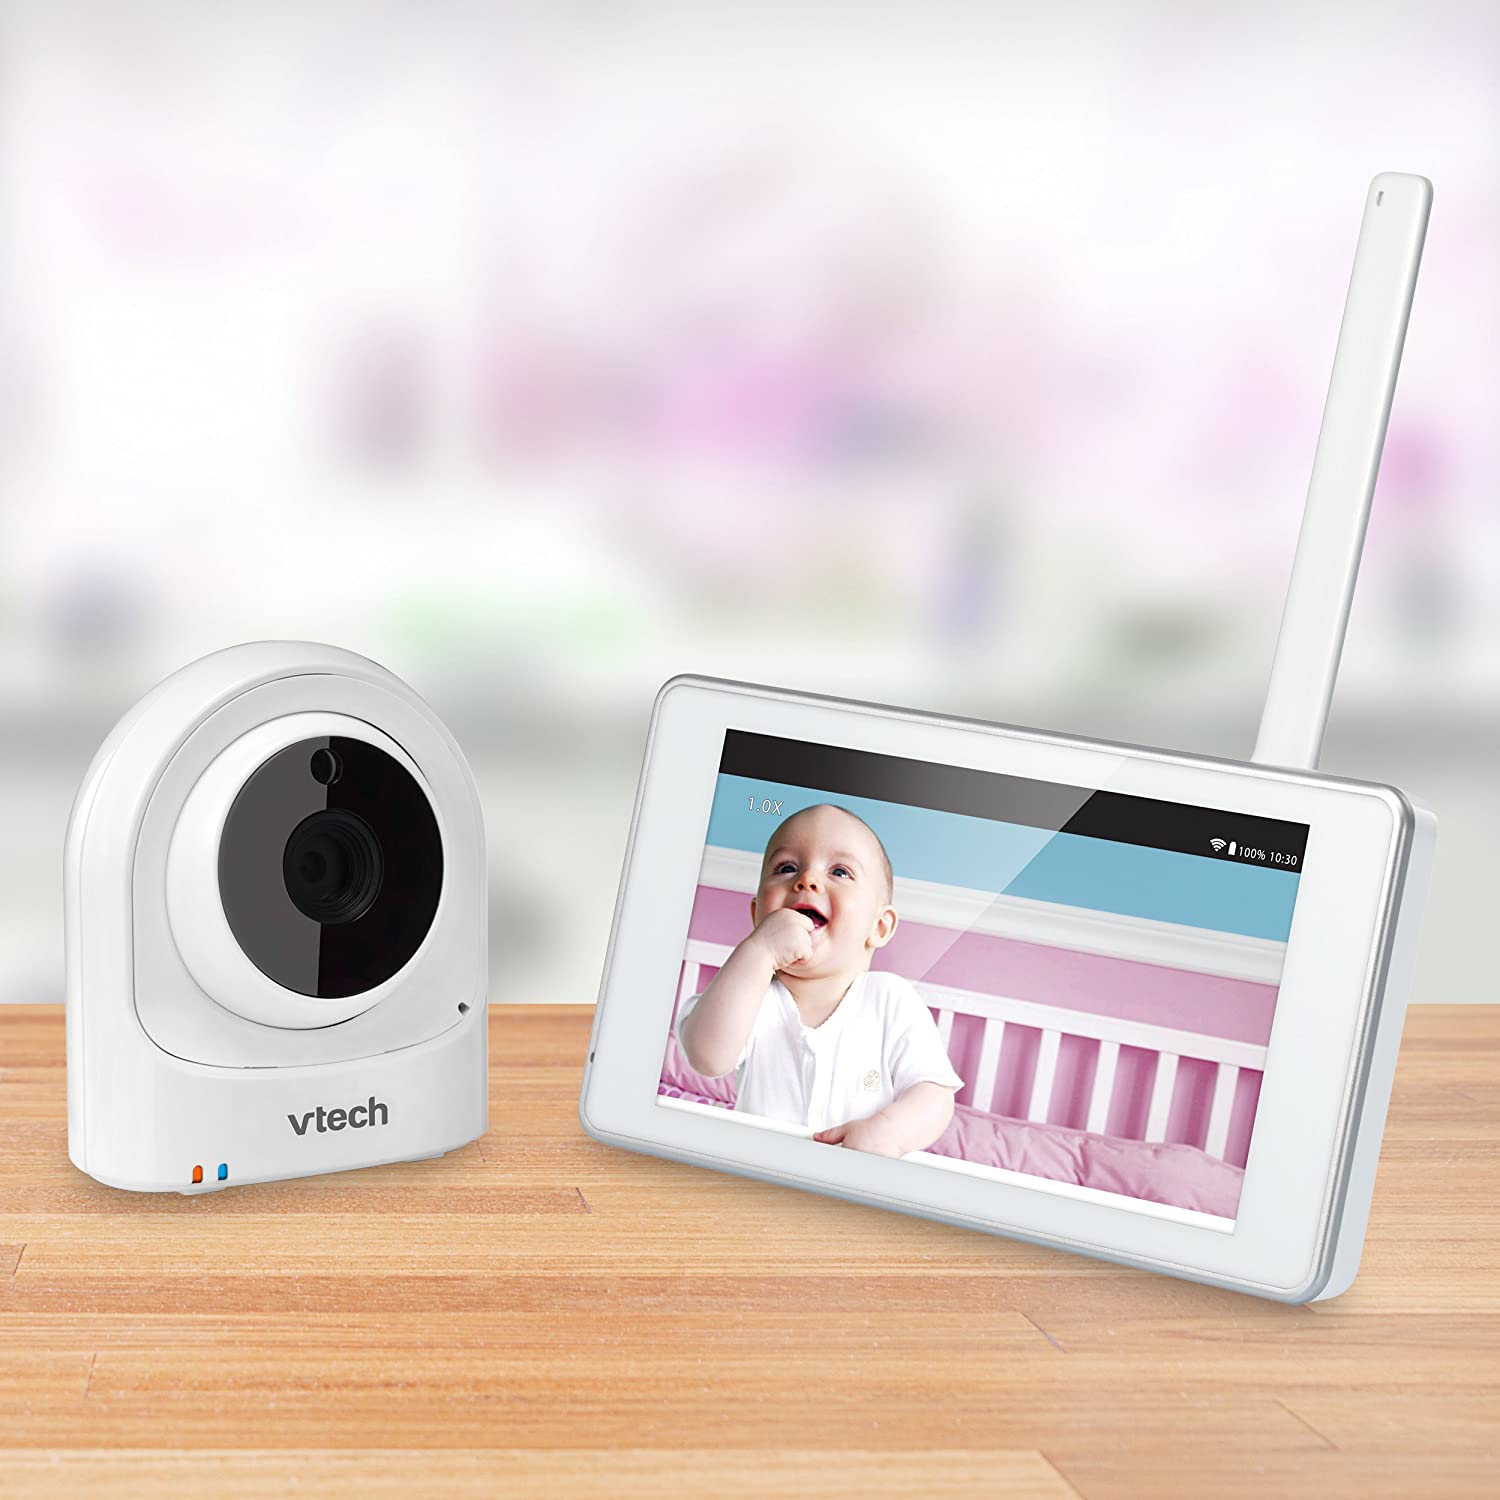 VTech VM981 Wireless WiFi Video Baby Monitor with Remote Access App, 5" Touch Screen, White